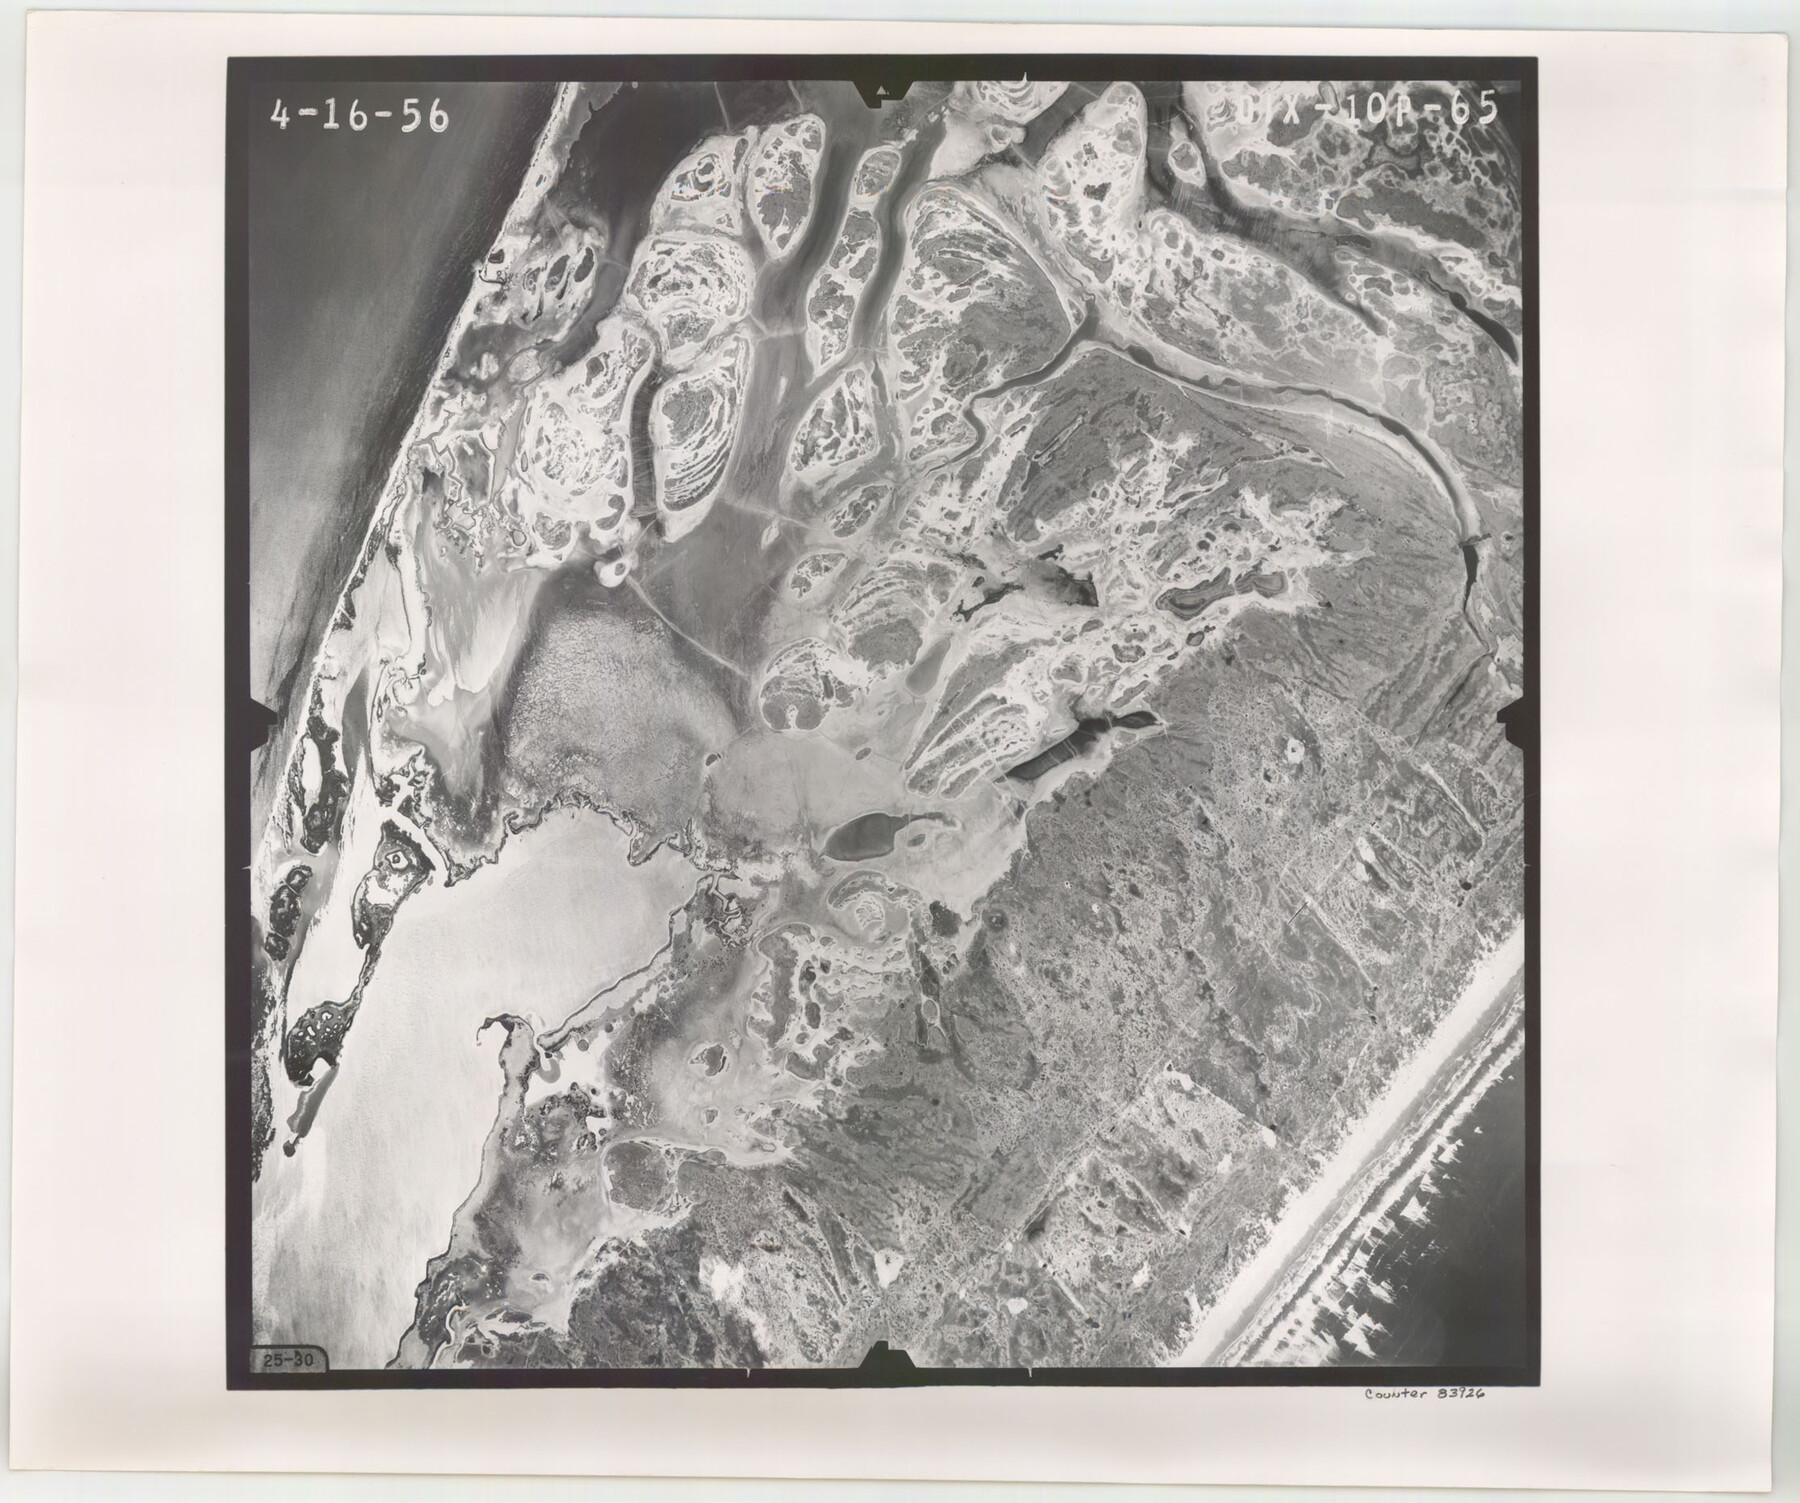 83926, Flight Mission No. DIX-10P, Frame 65, Aransas County, General Map Collection